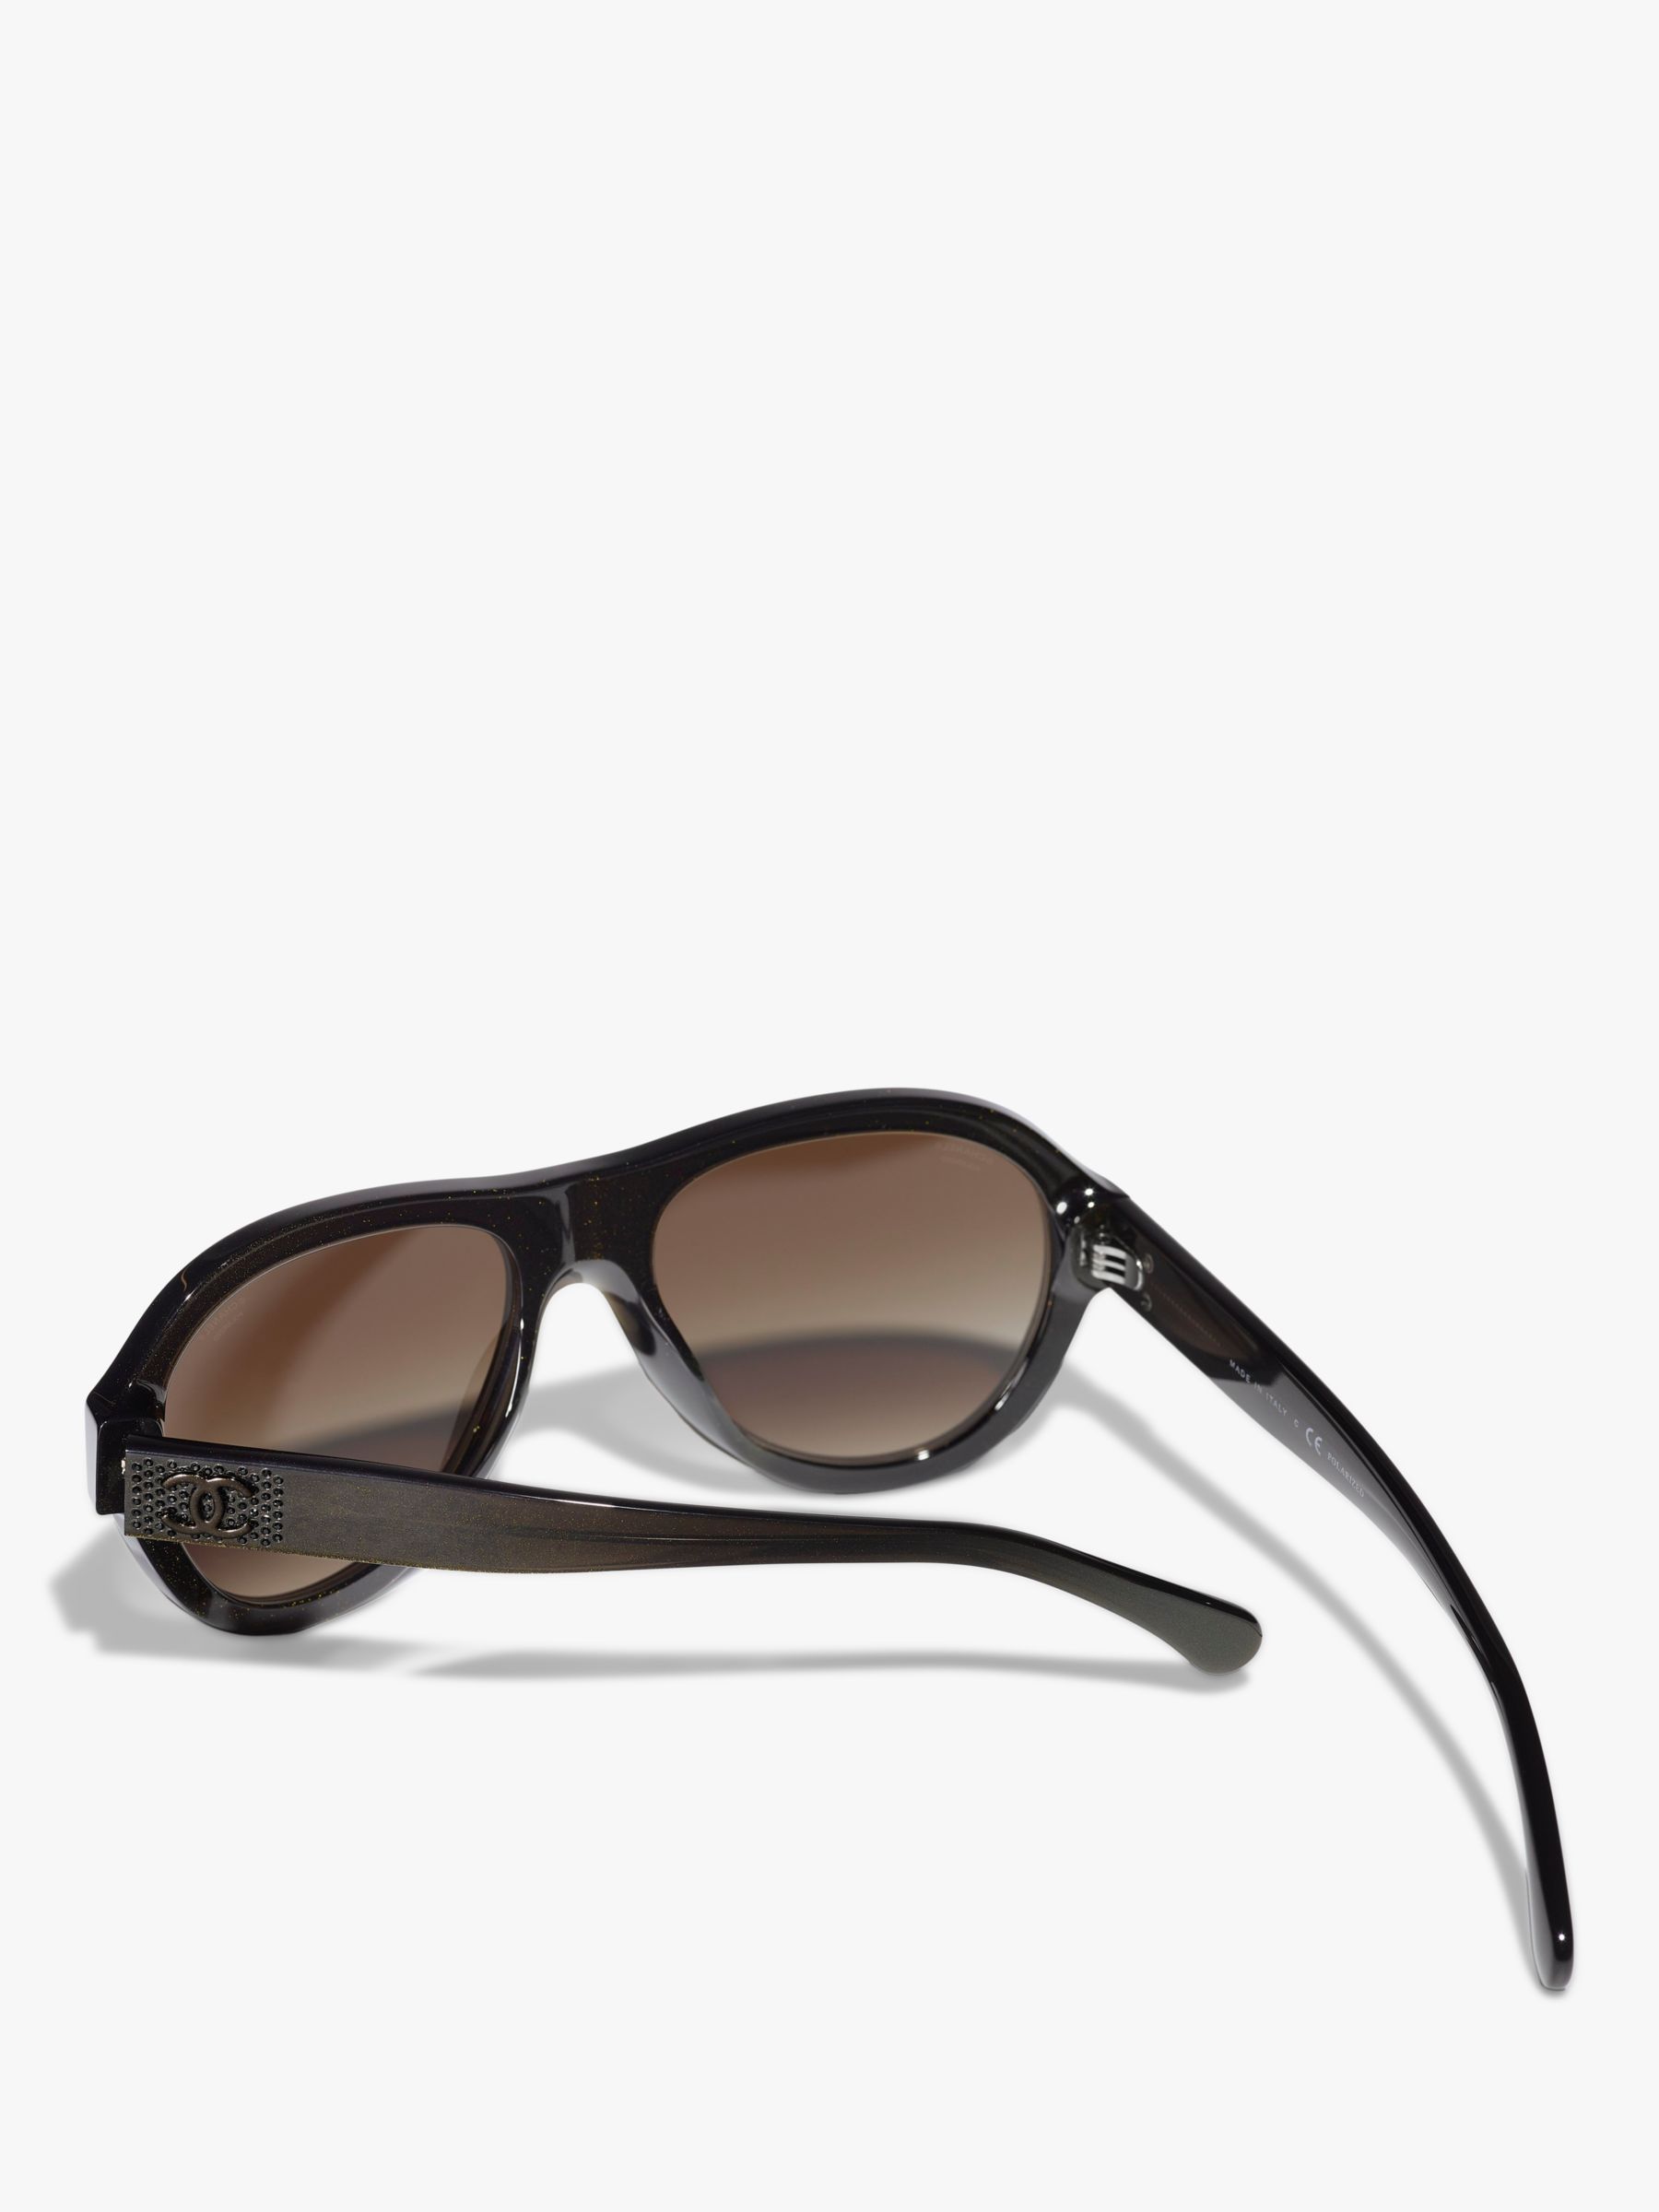 CHANEL Oval Sunglasses CH5467B Iridescent Brown/Brown Gradient at